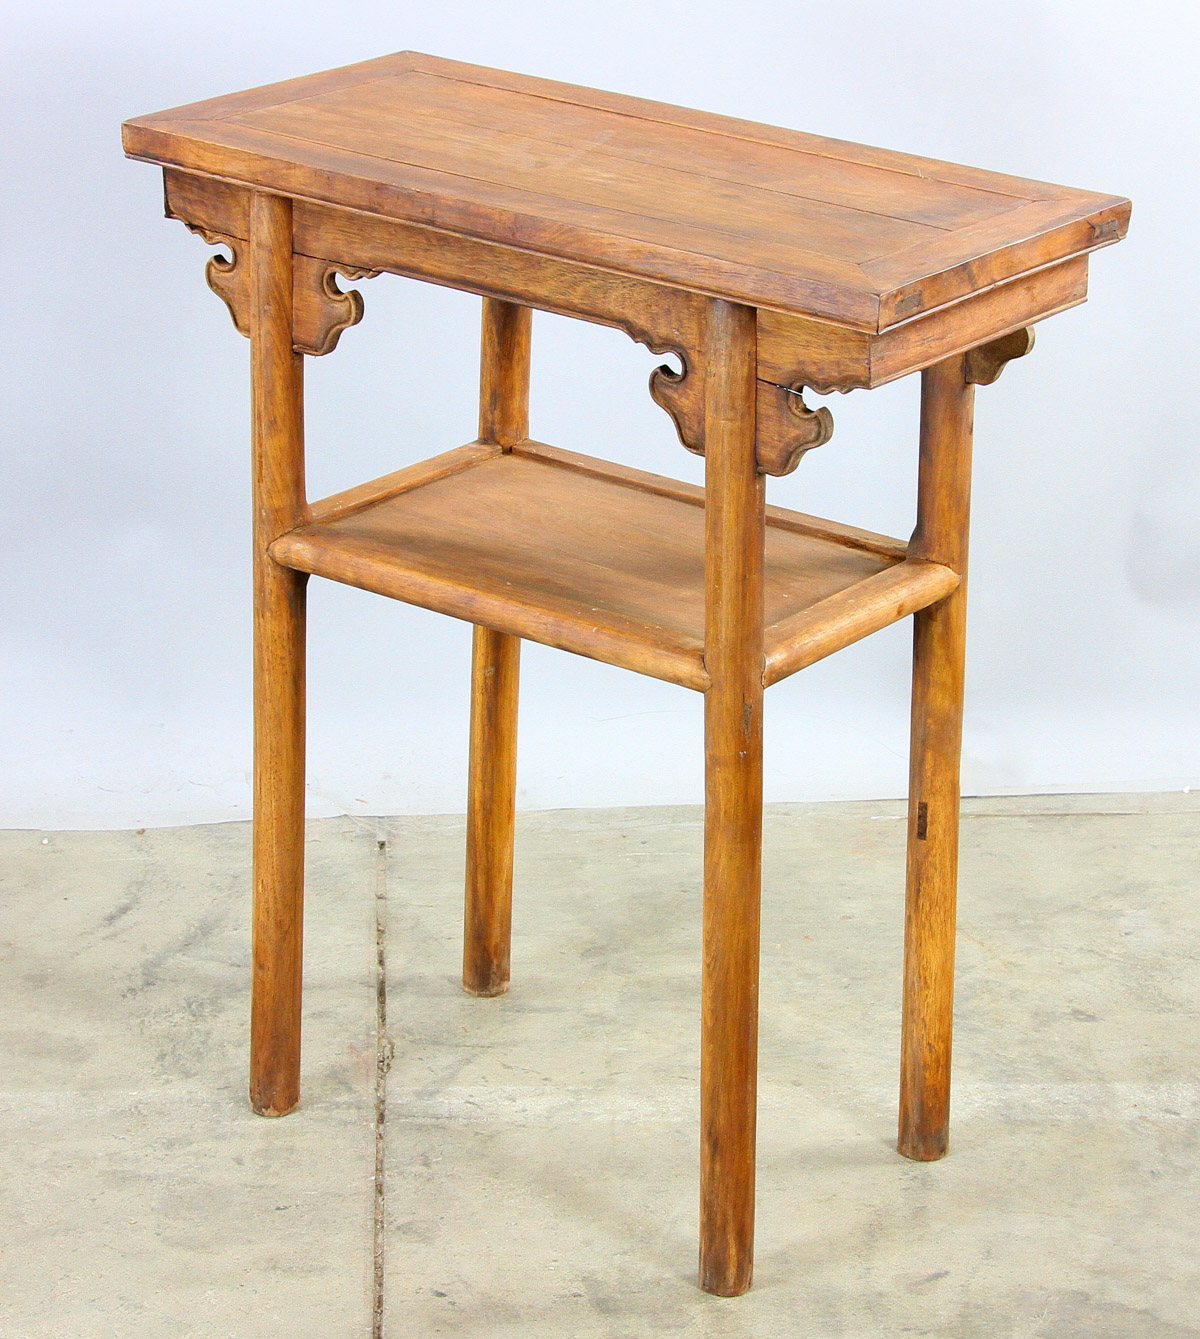 Small Chinese hardwood table, 31" x 13" x 16". - Image 3 of 6